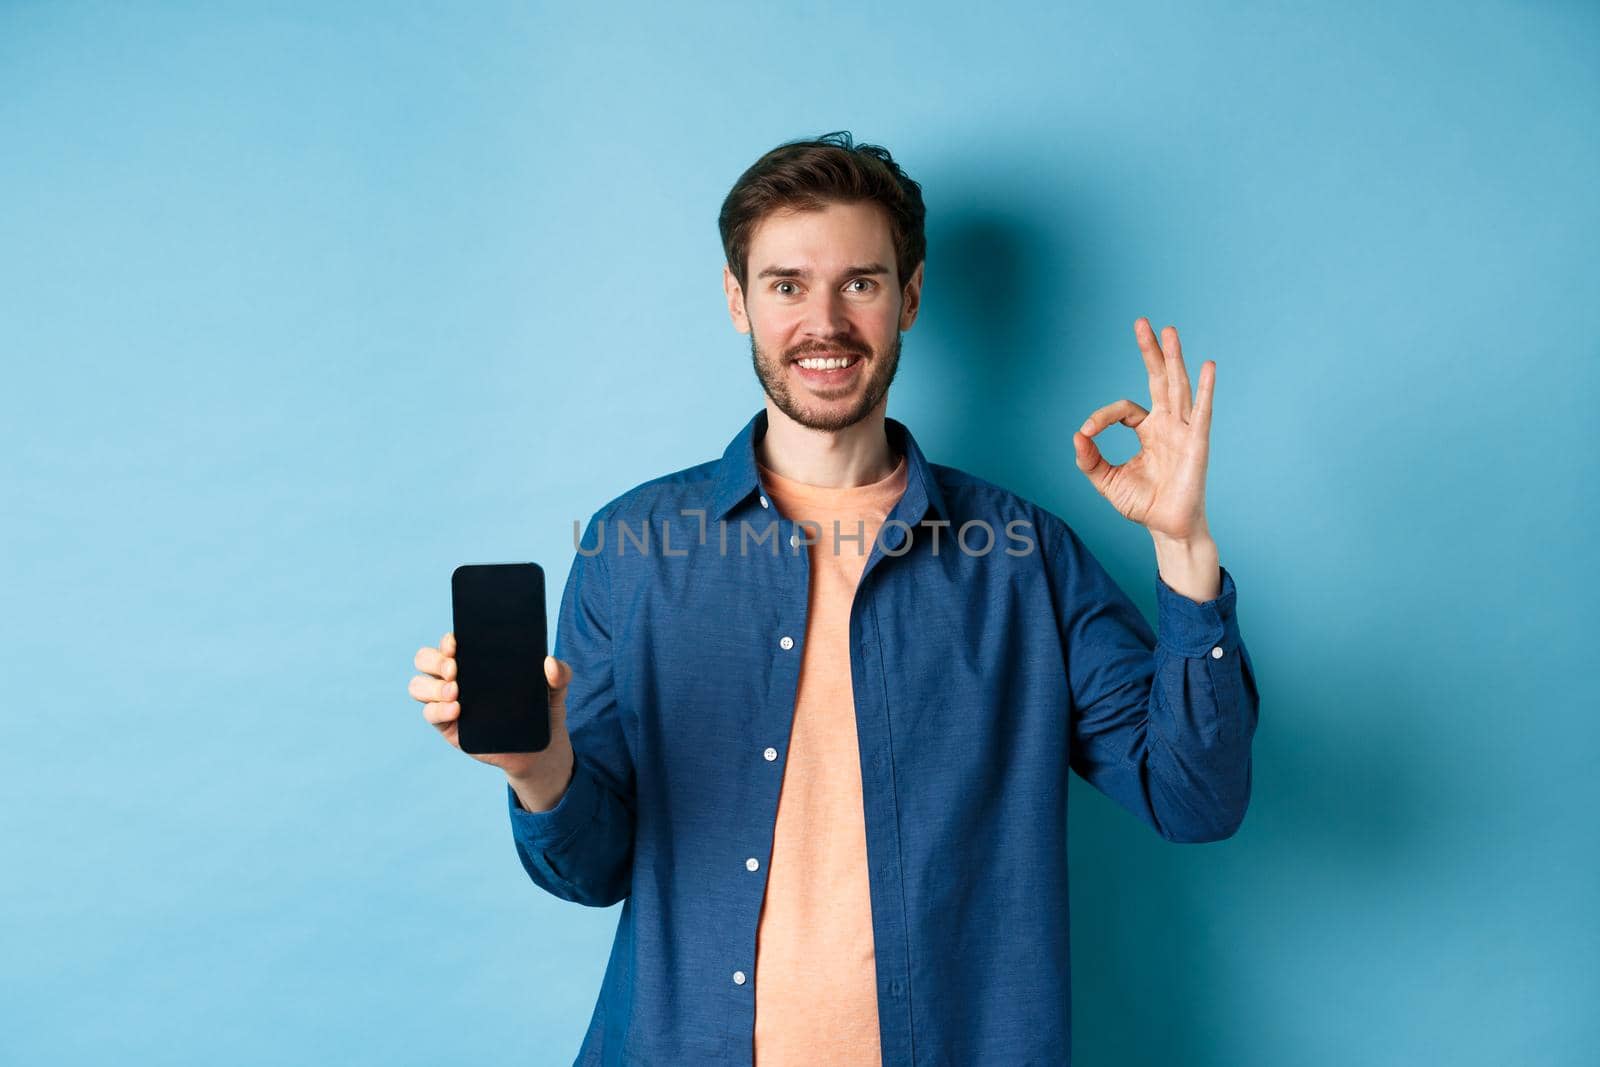 Handsome young man showing okay gesture and empty smartphone screen, recommending app or company, standing on blue background.